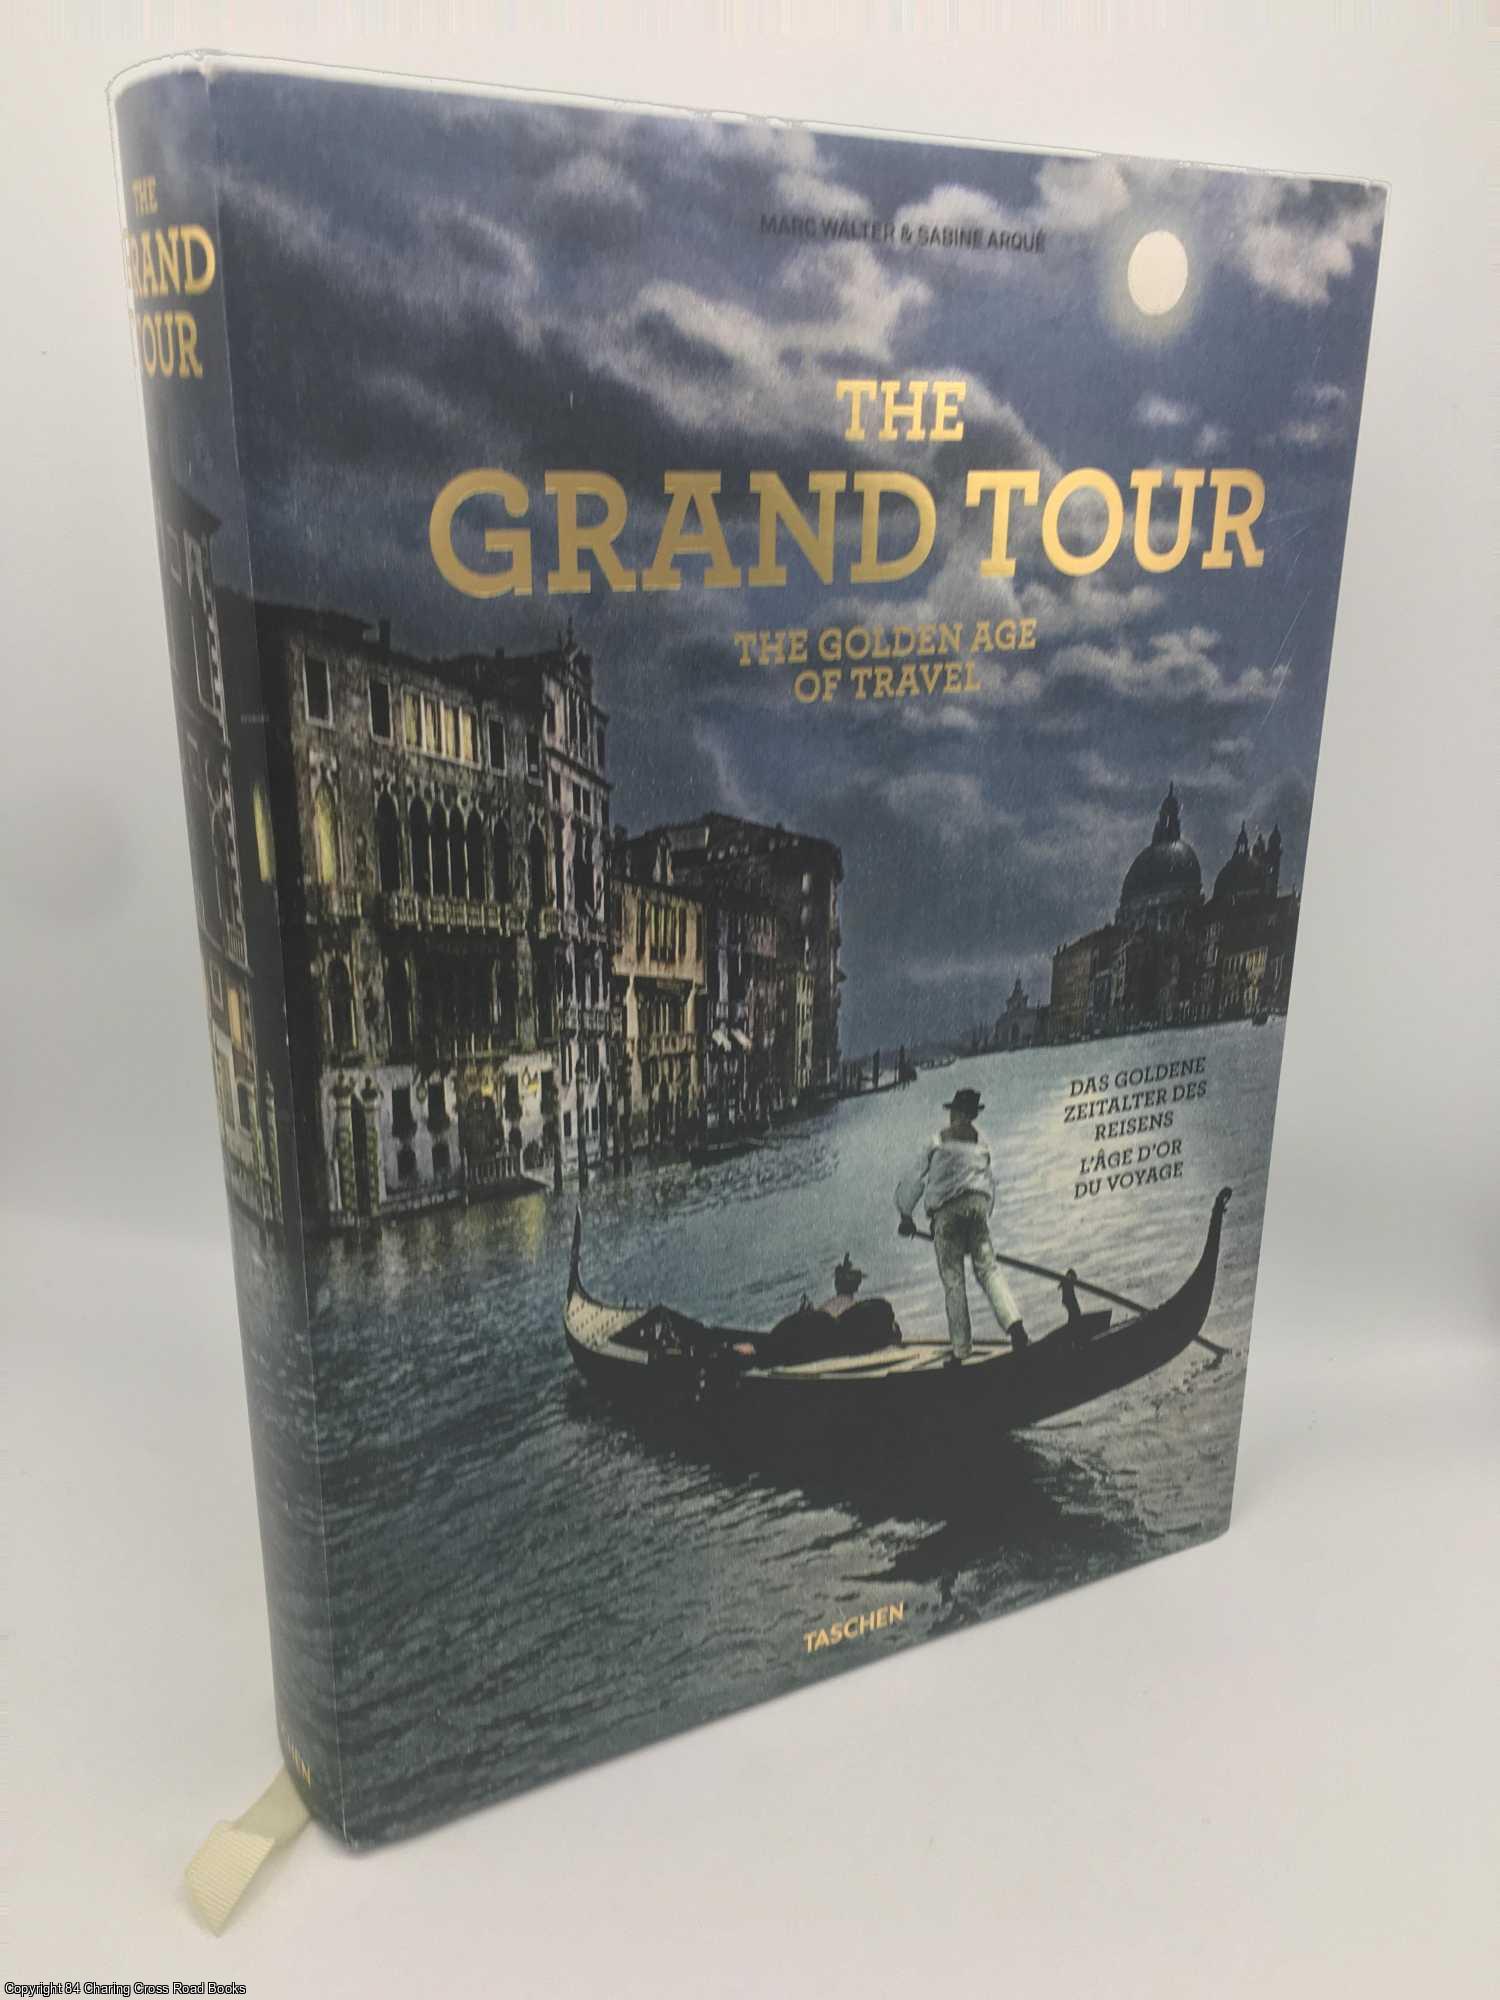 The Grand Tour: the golden age of travel by Marc Walter on 84 Charing Cross  Rare Books